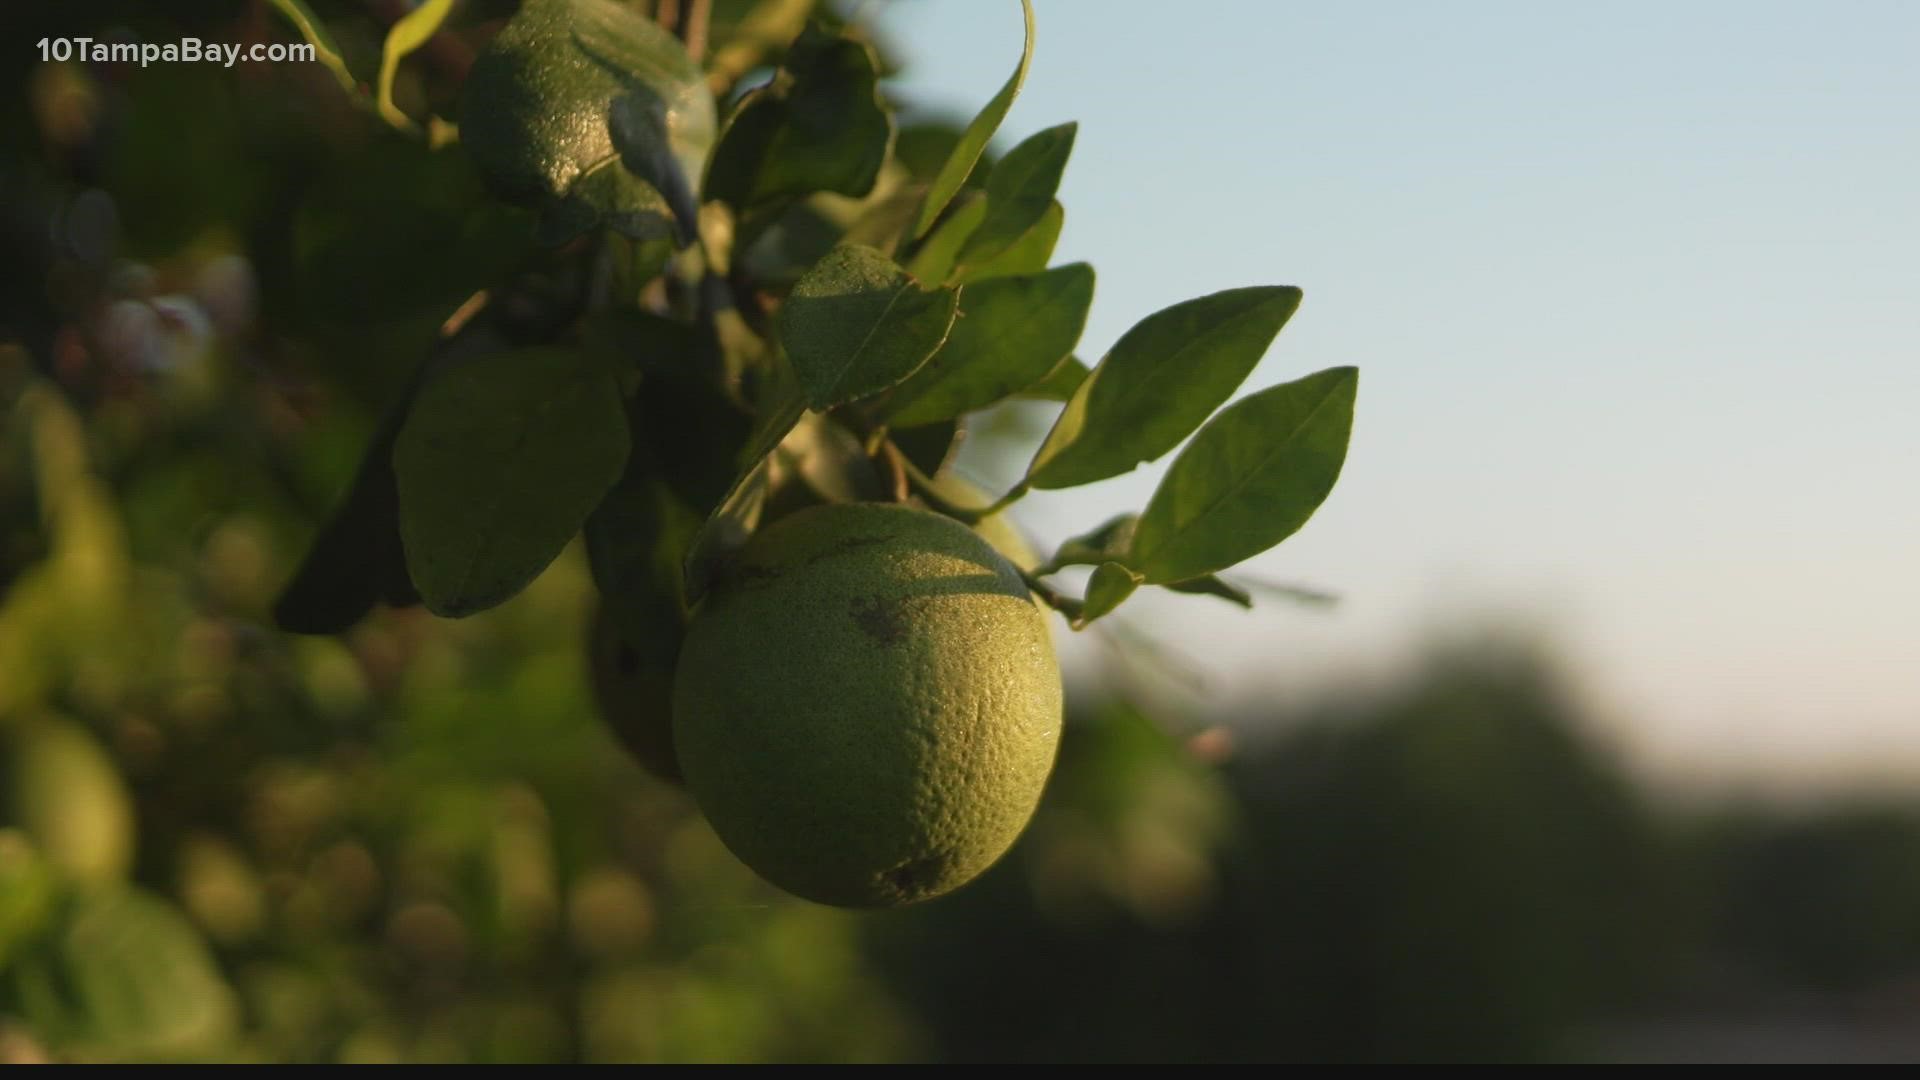 Without a cure for citrus greening, growers worry about the future.